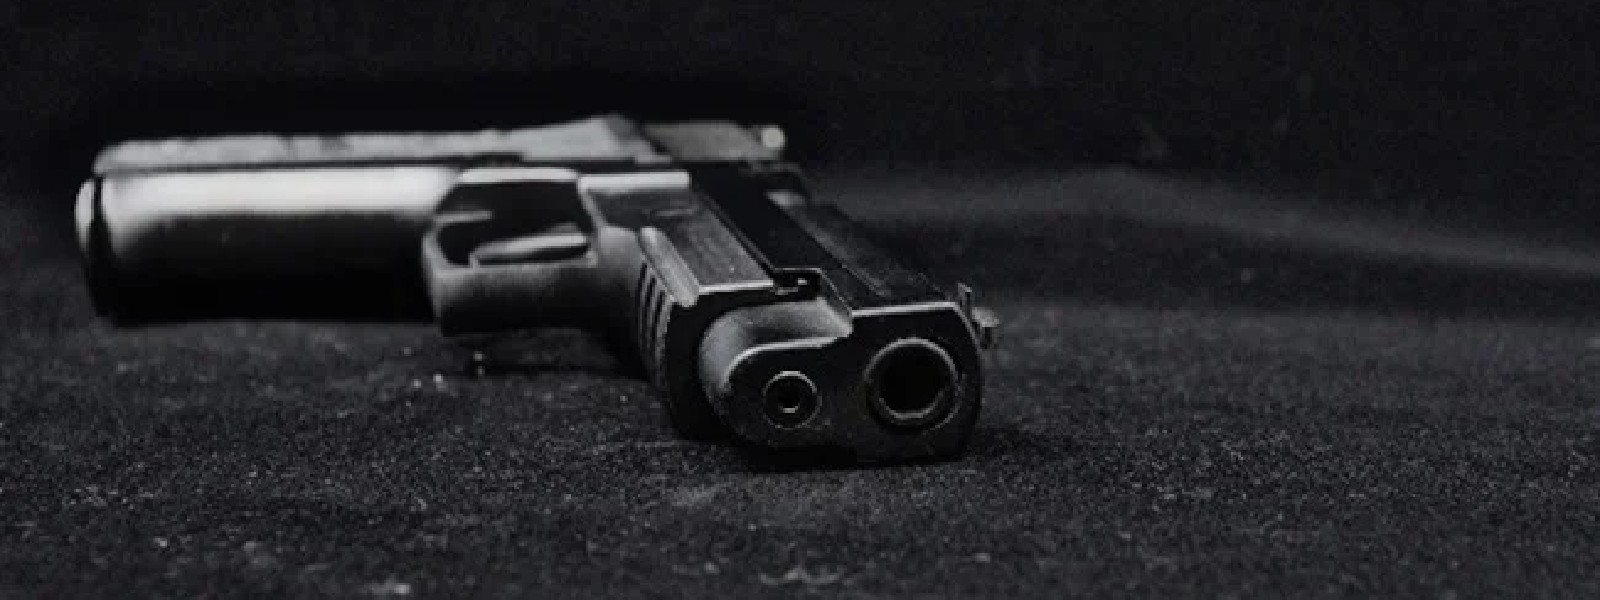 Criminal gangster fatally shot by Police STF